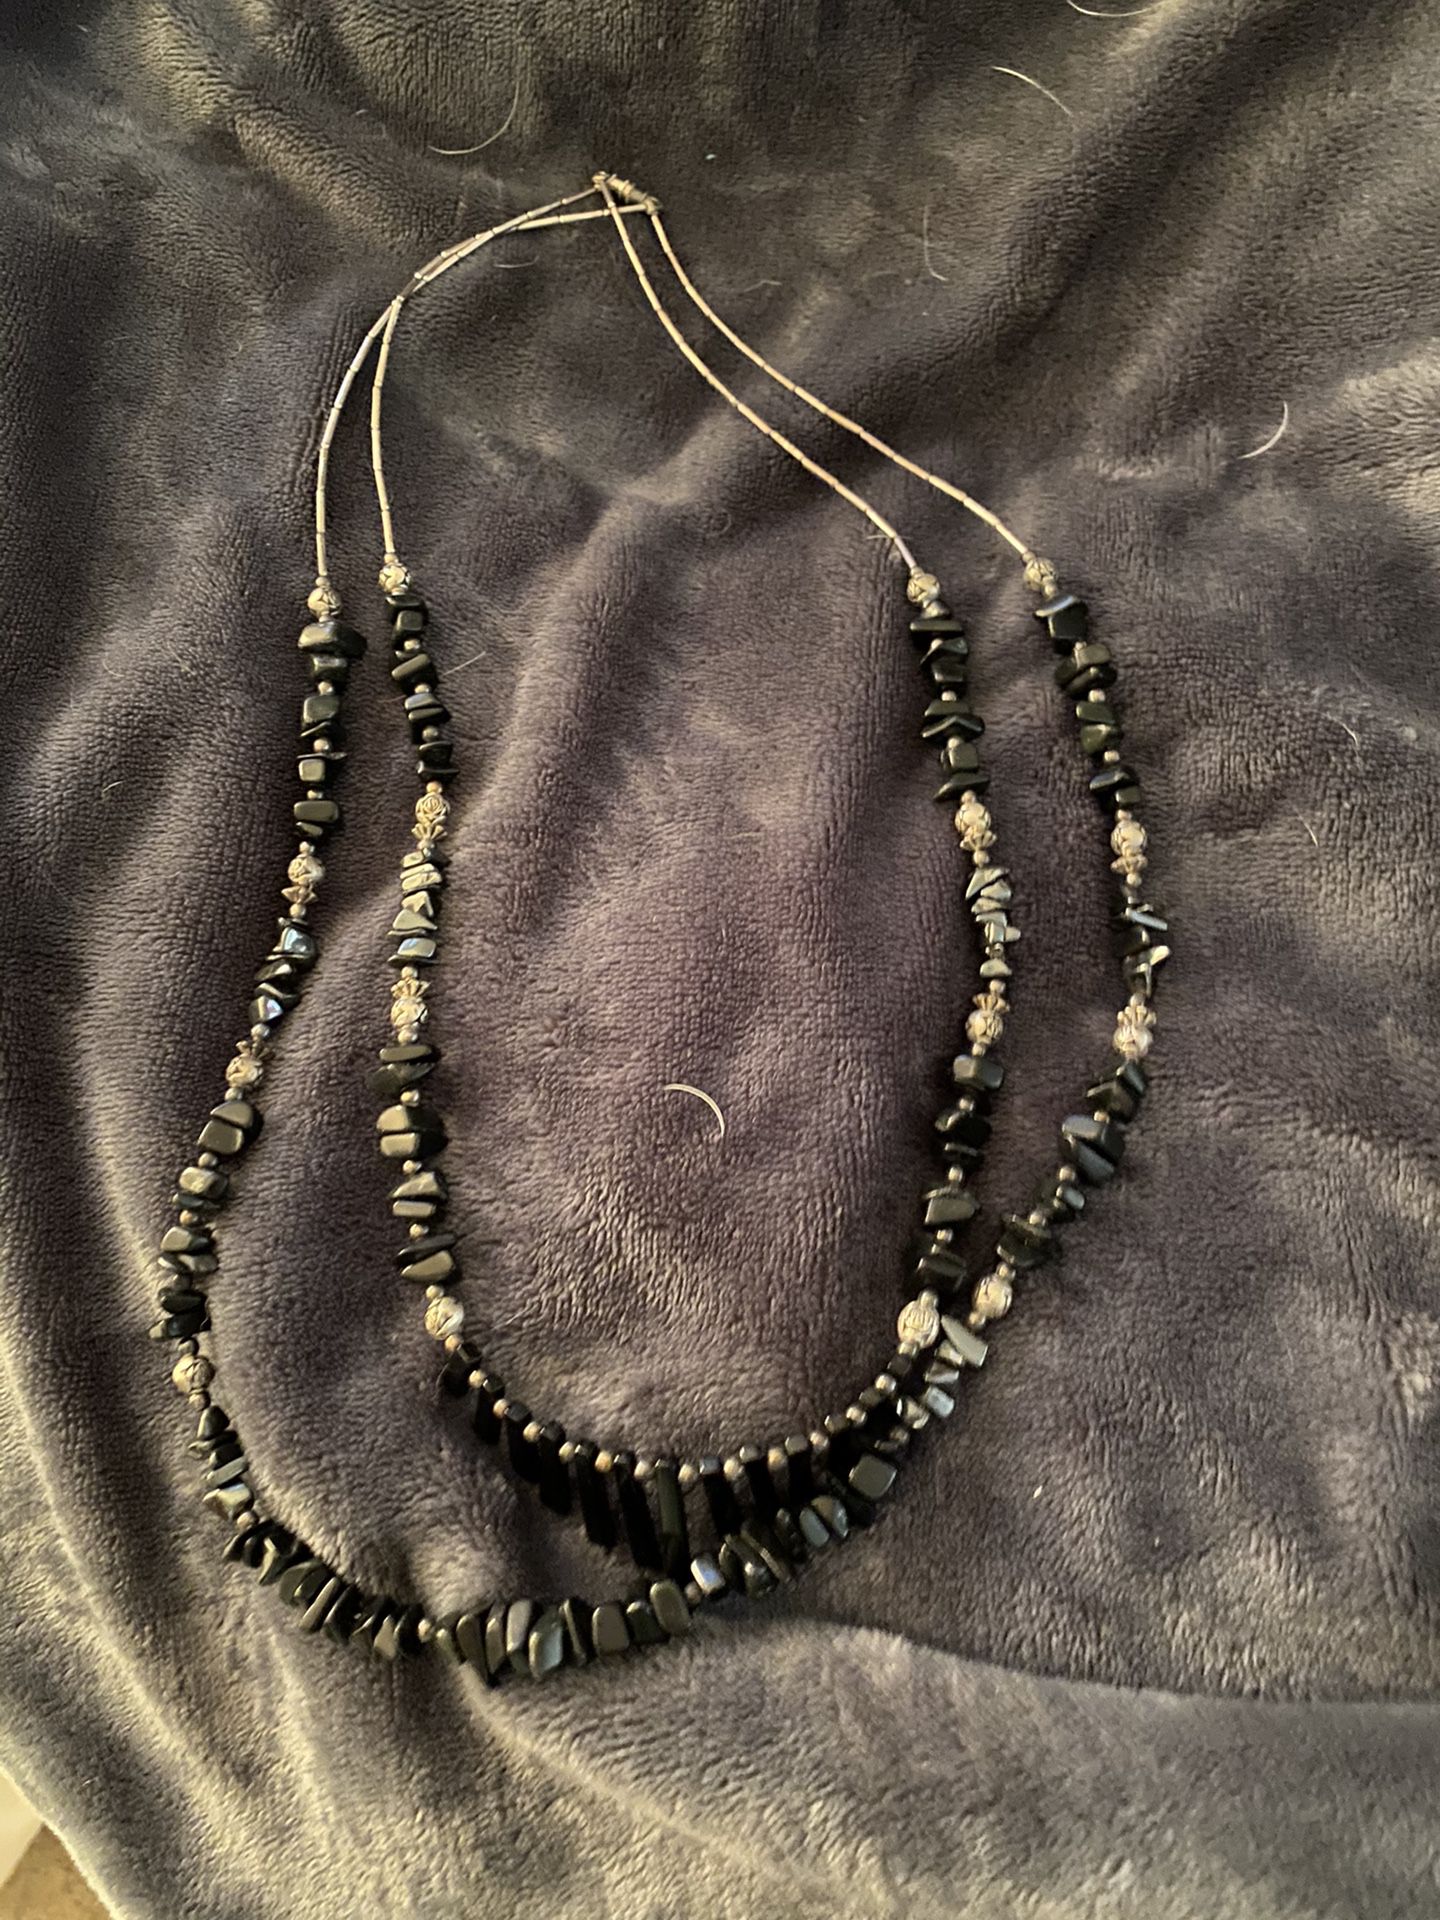 Mexican silver beaded/black stones necklace from Mexico